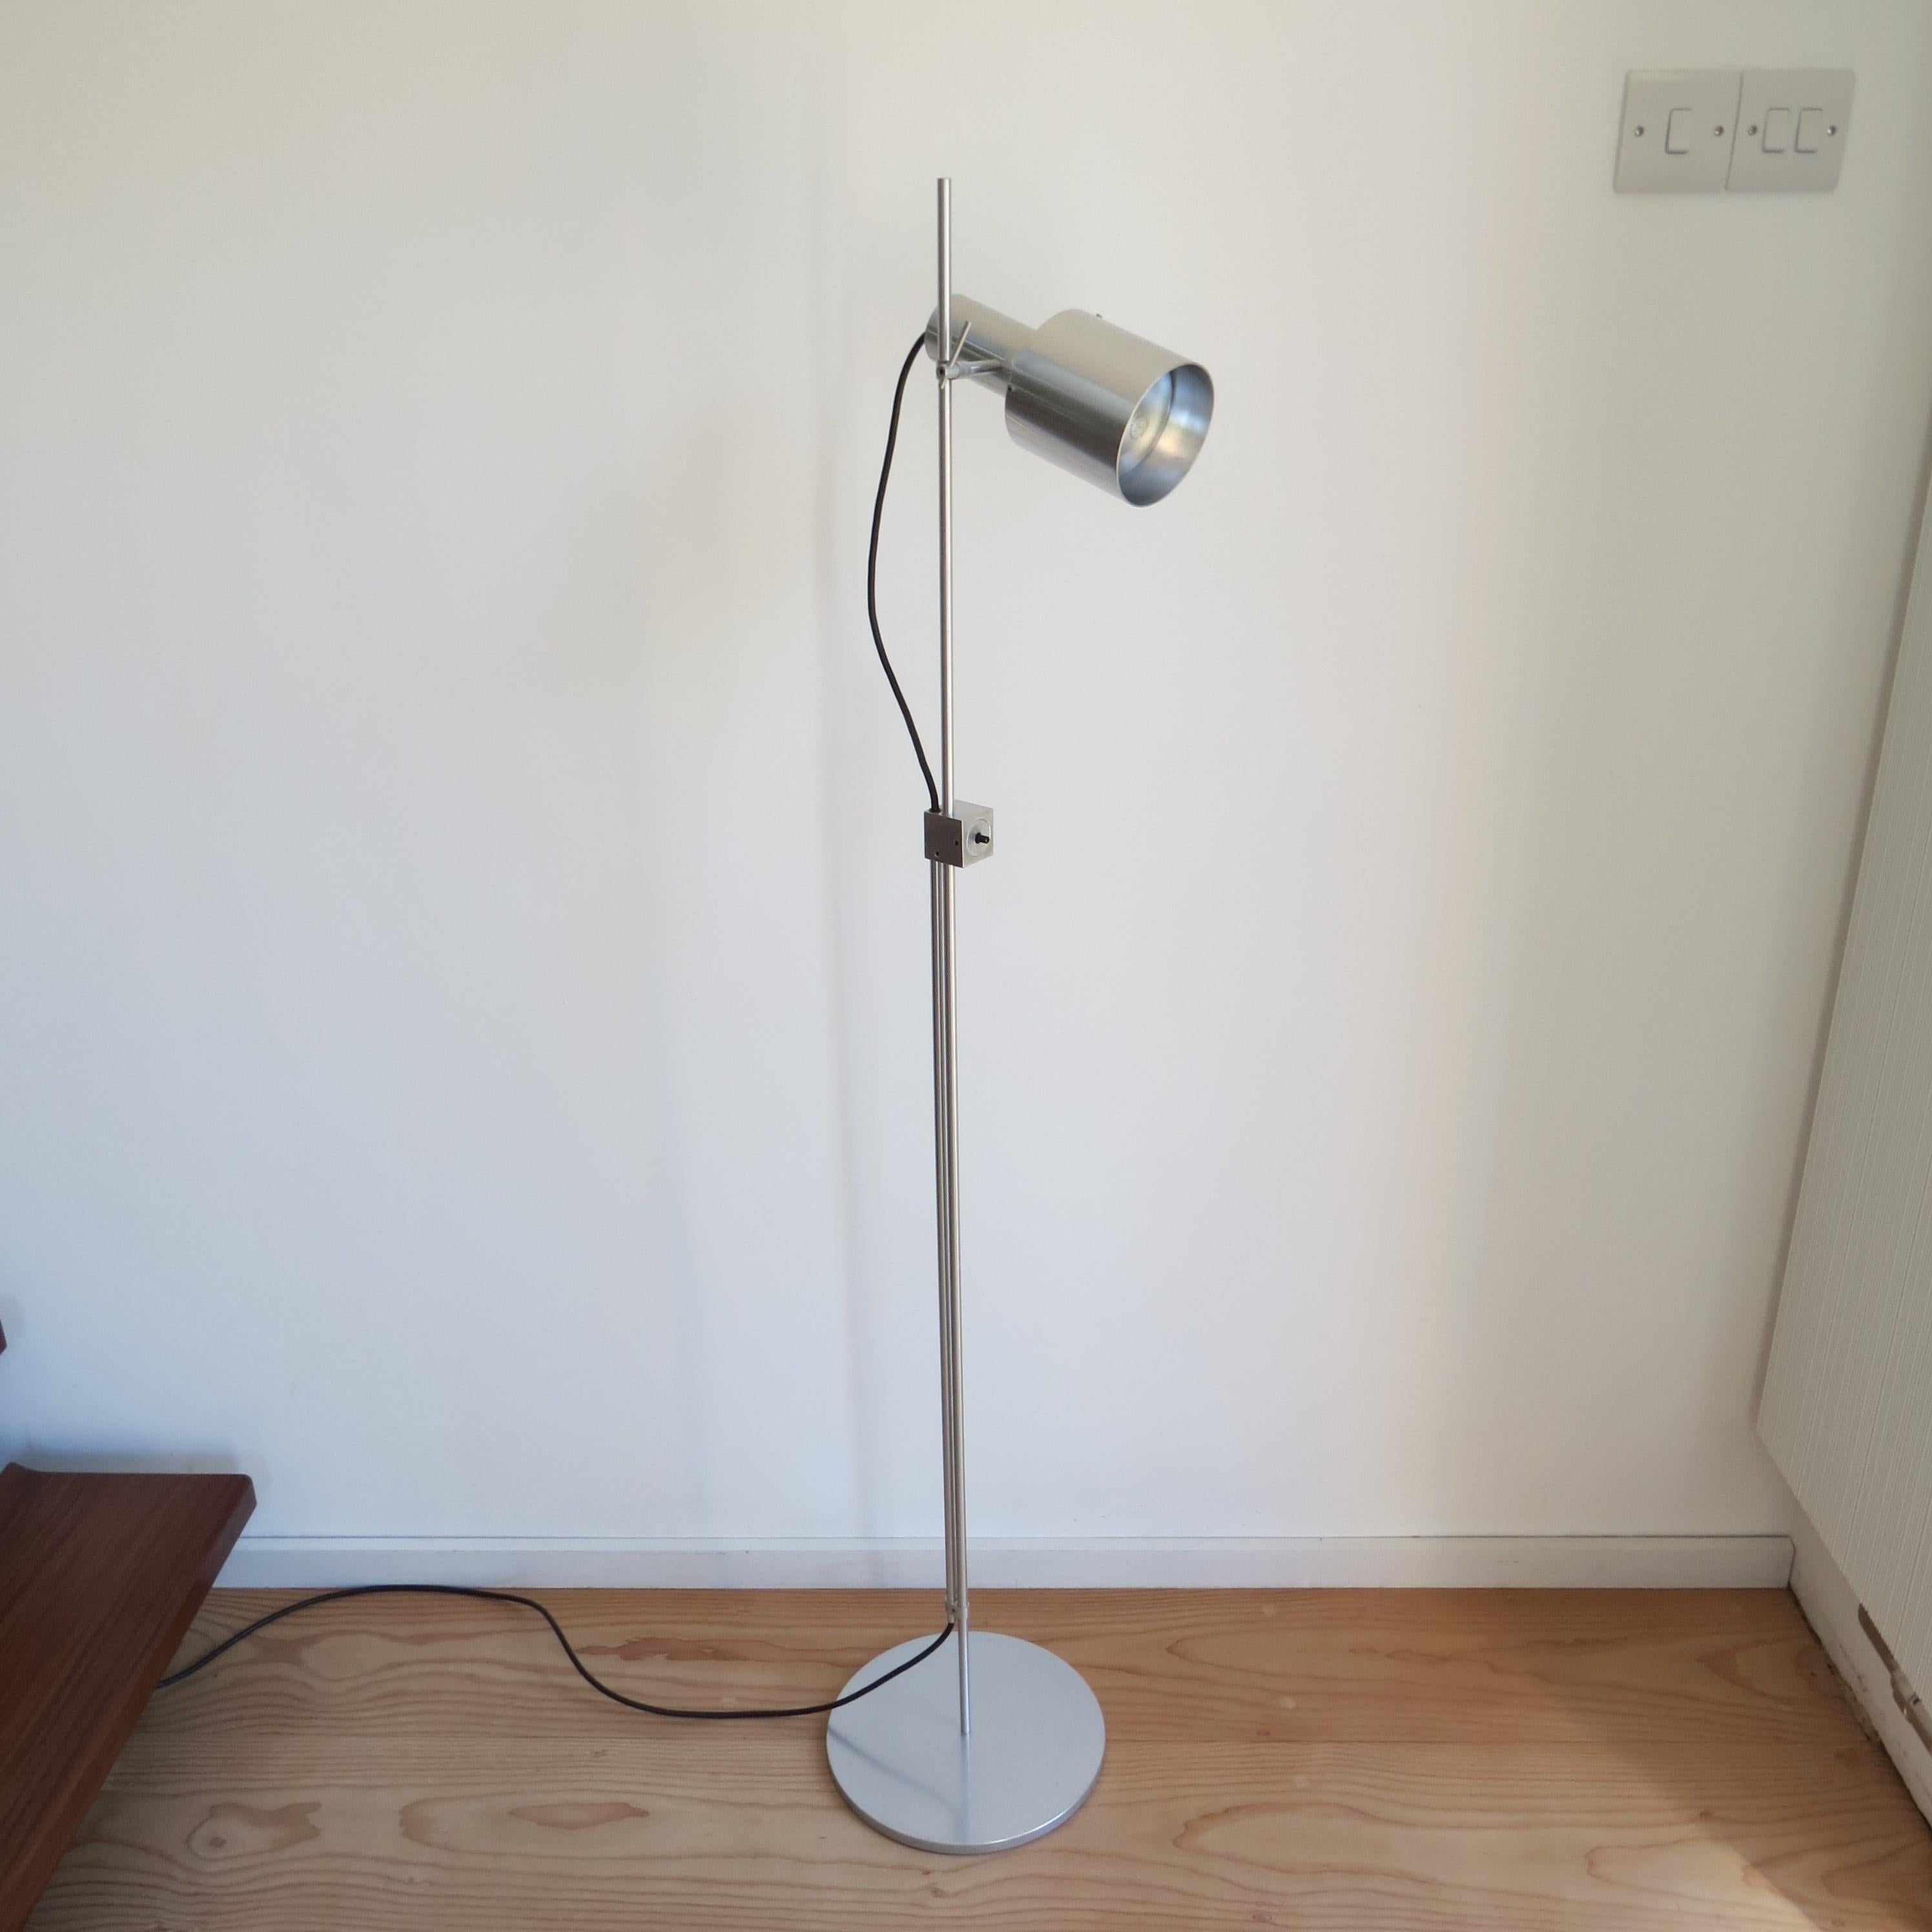 Rare aluminium floor lamp designed Peter Nelson and produced by Architectural Lighting Ltd. Date from the early 1960s. The lamp has a single spot adjustable lamp that moves up and down the rod and also tilts to the required angle. Made from solid